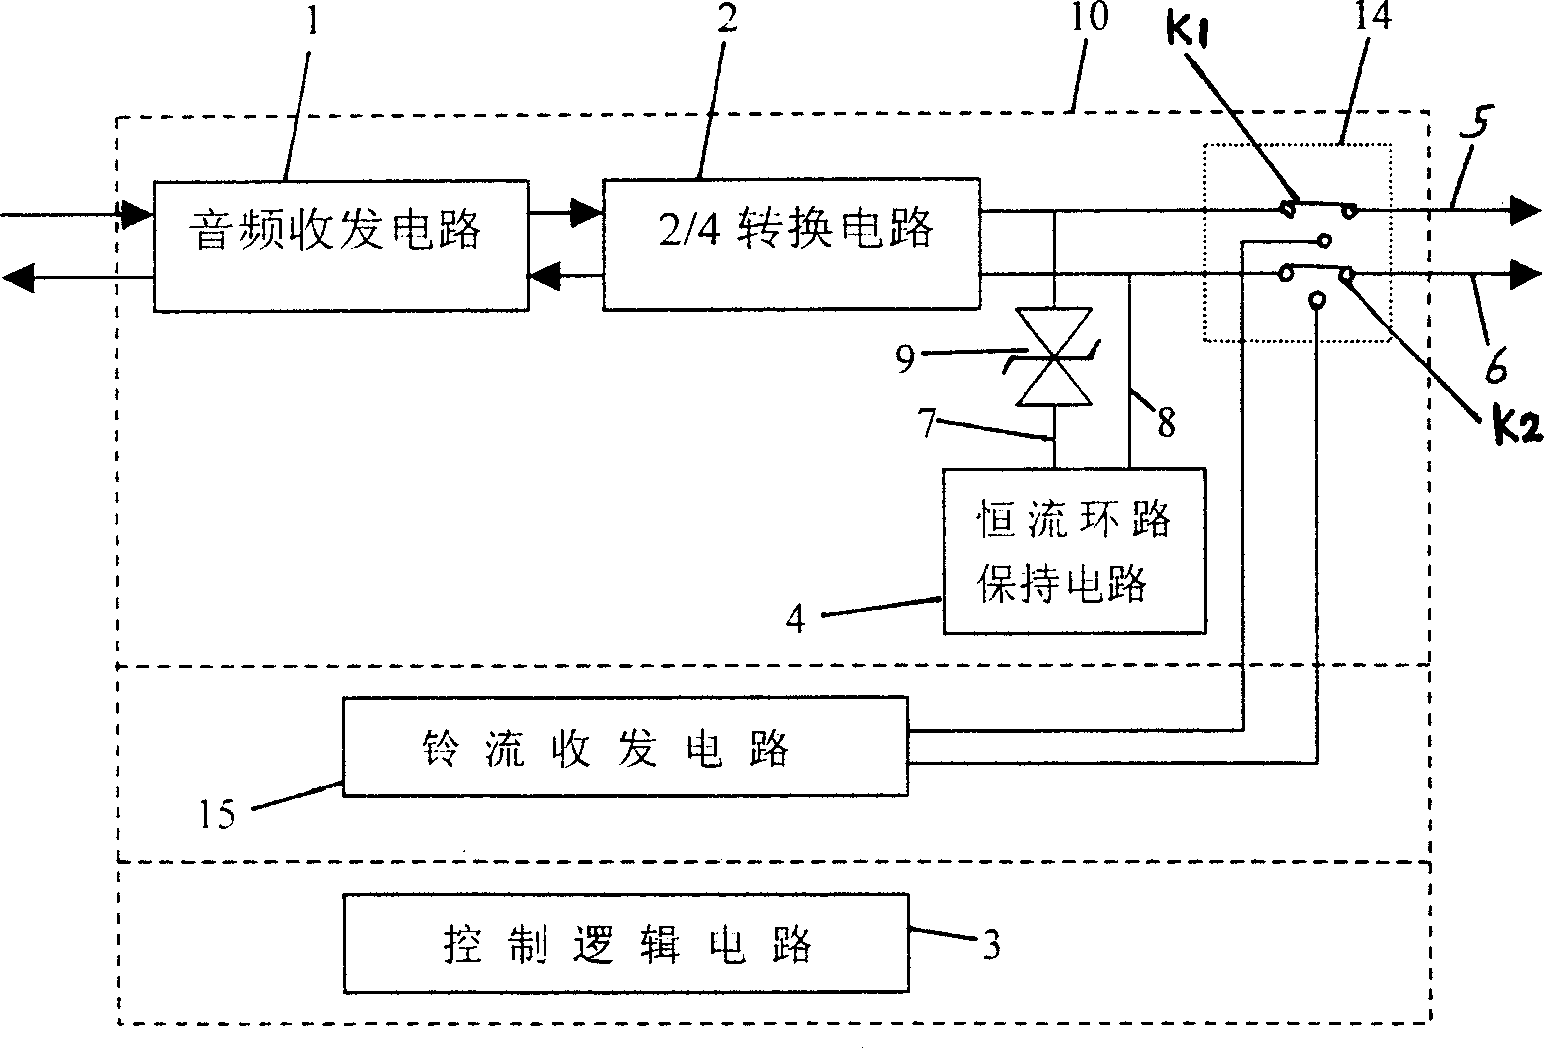 Comprehensive test device for analog interface in telephone exchange